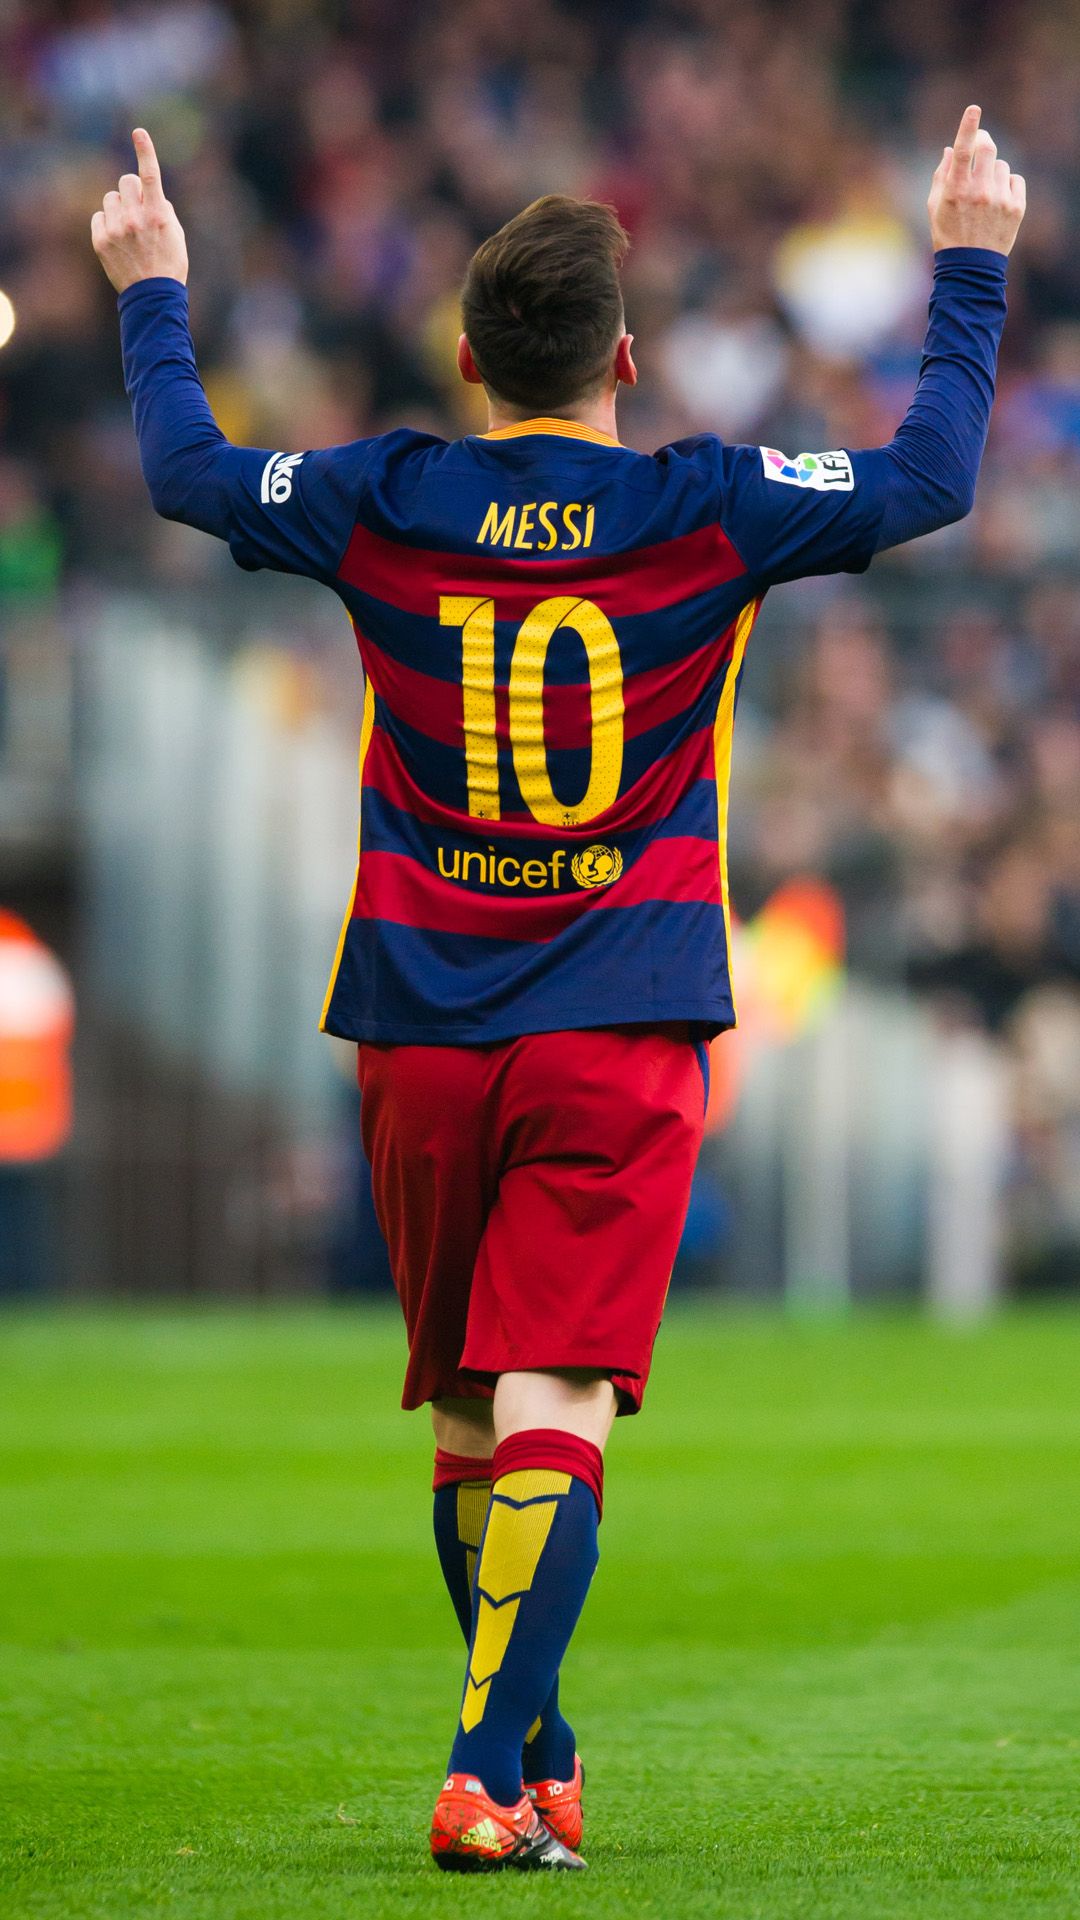 Lionel Messi Football Player 10 Mobile wallpaper